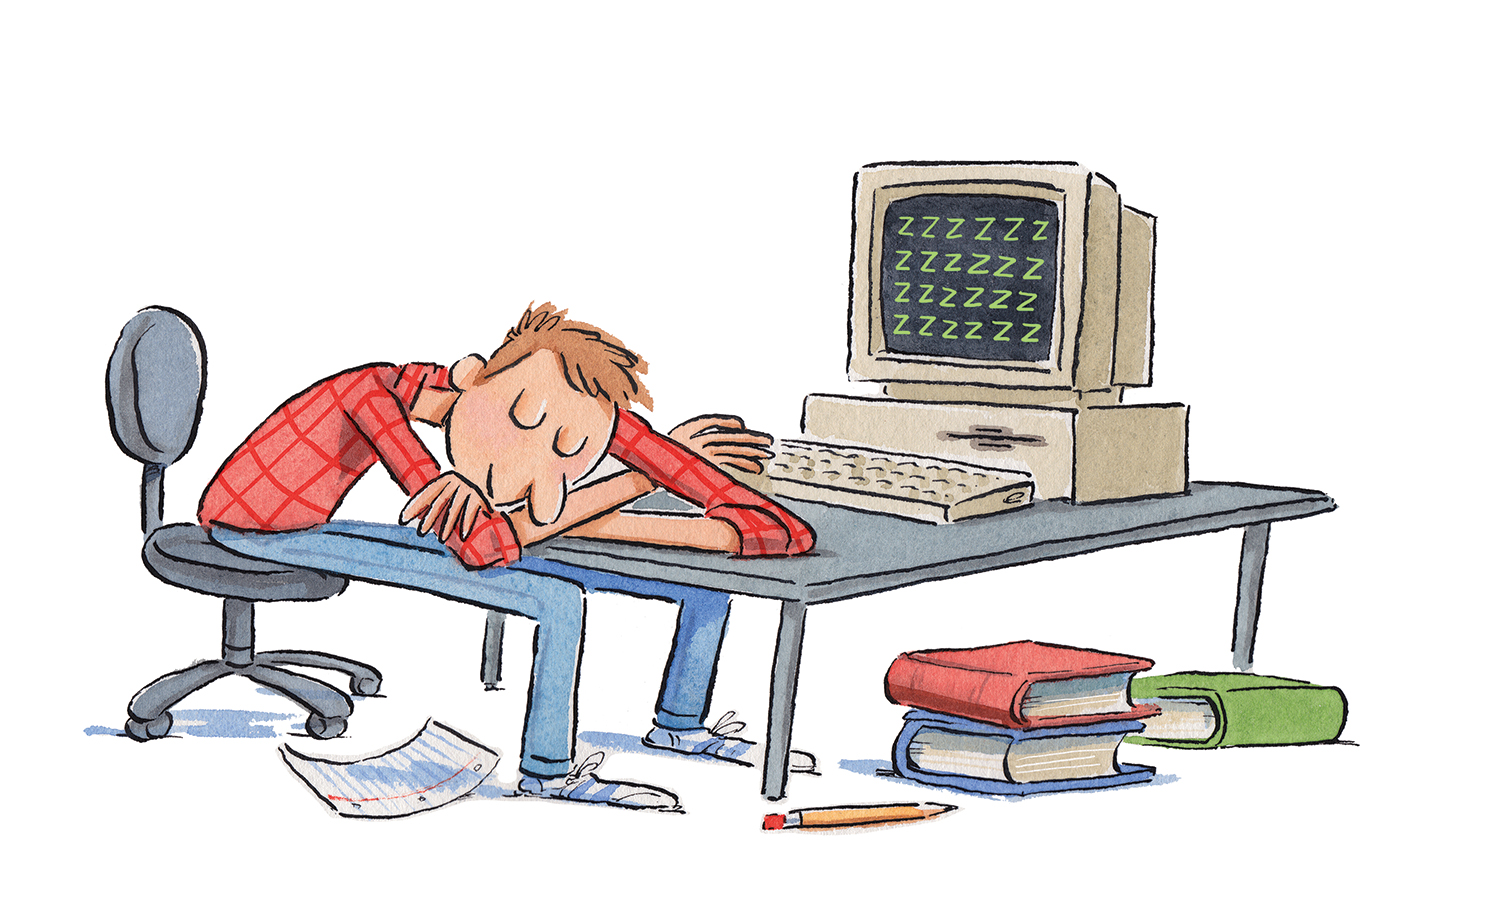 An illustration of a man asleep at his computer desk with his hand on the keyboard. The monitor displays numerous Z's. Books, a piece of paper, and a pencil are on the floor.